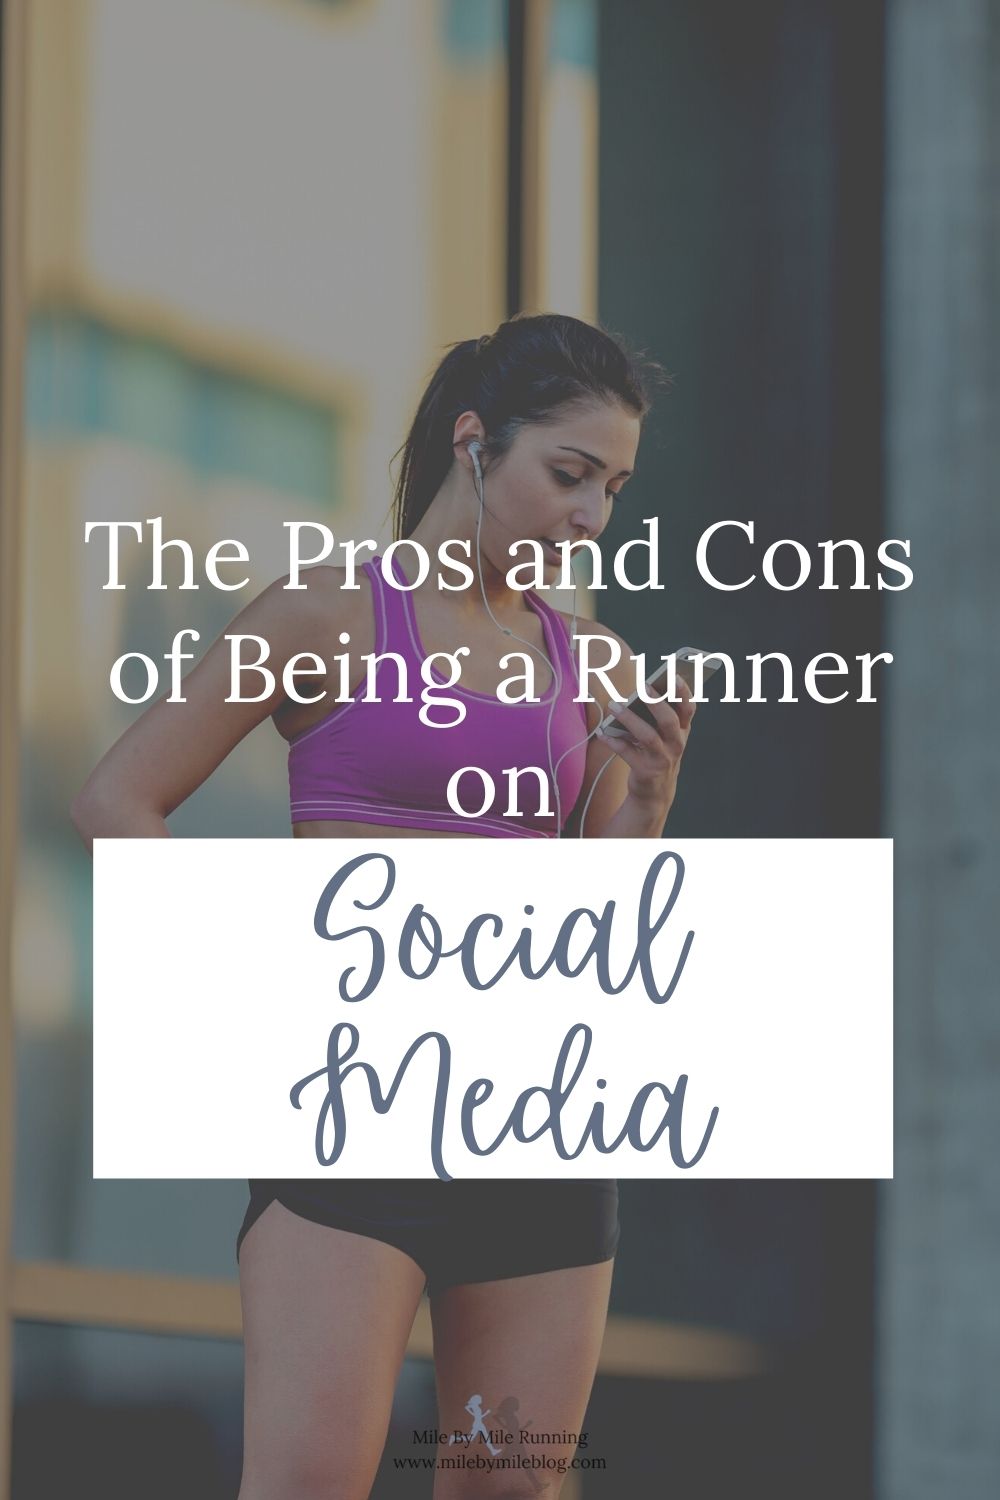 These days you really can't avoid social media. Most people use at least one platform, including runners. But as runners there are many pros and cons to being on social media and connecting with others who share a similar passion for the sport. So, as a runner on social media, what do you need to consider?